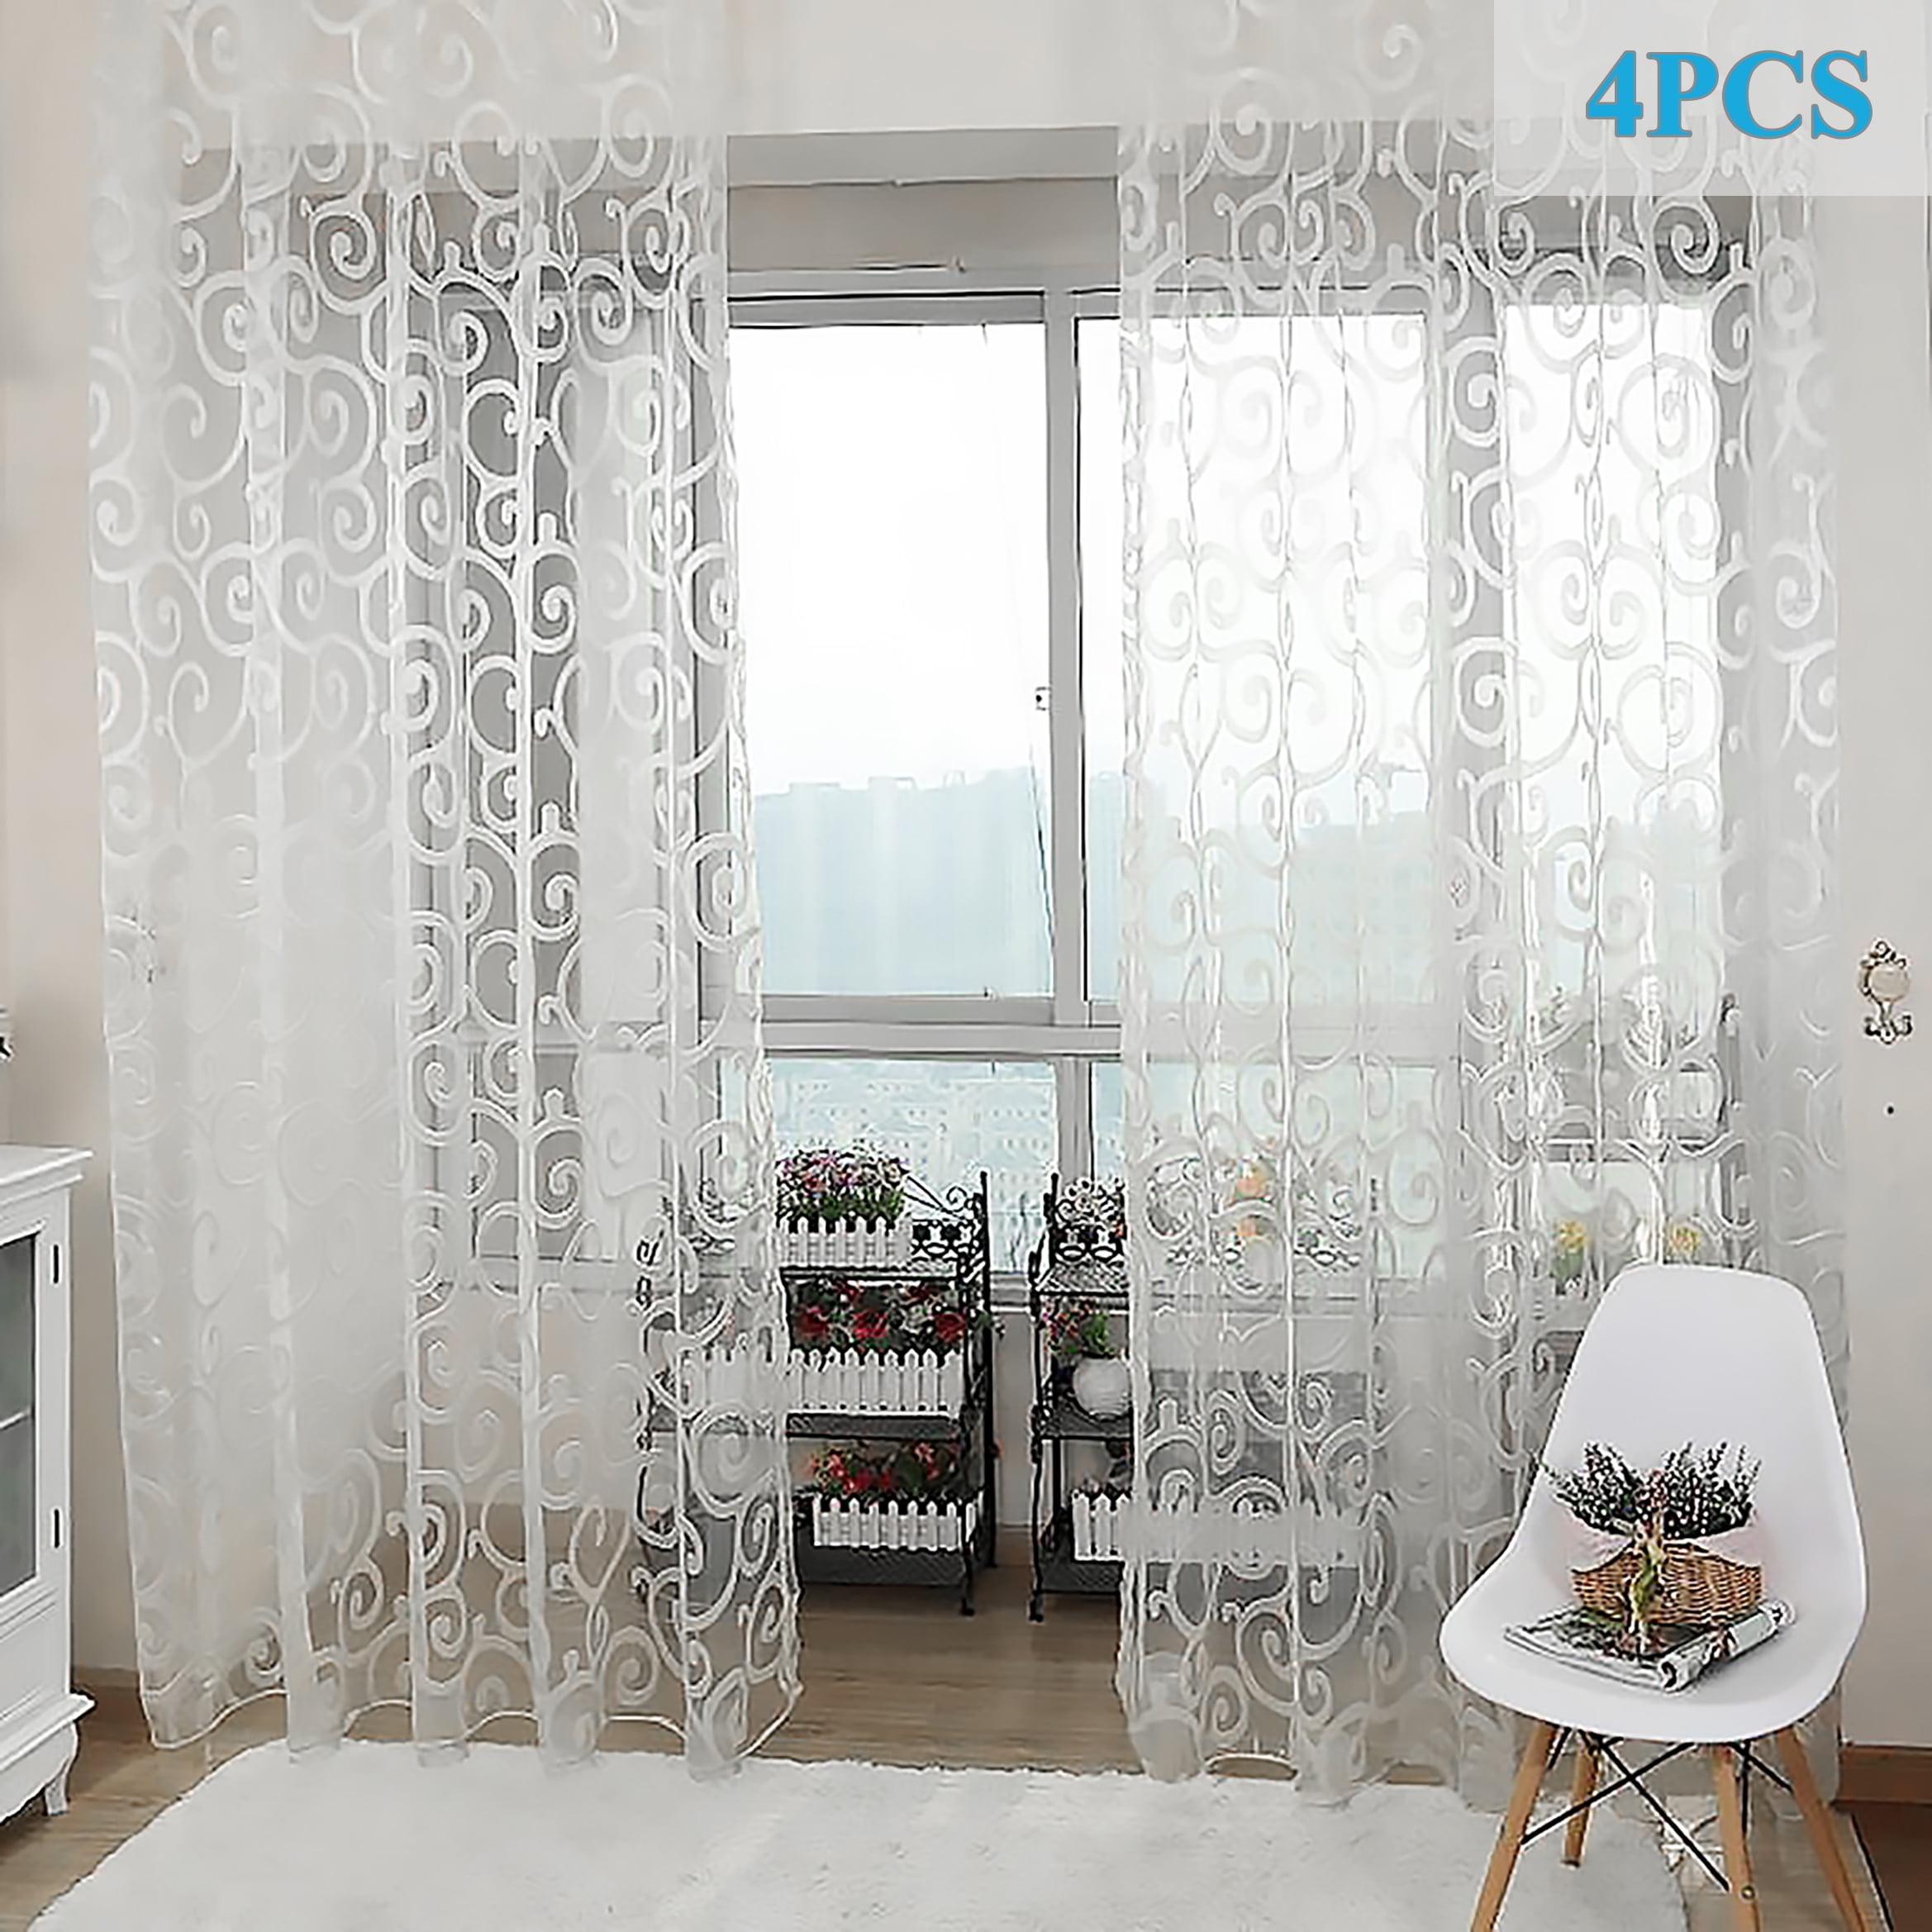 4 Pcs Sheer Curtains Lace Boho Cute Window Curtains For Bedroom Living ...